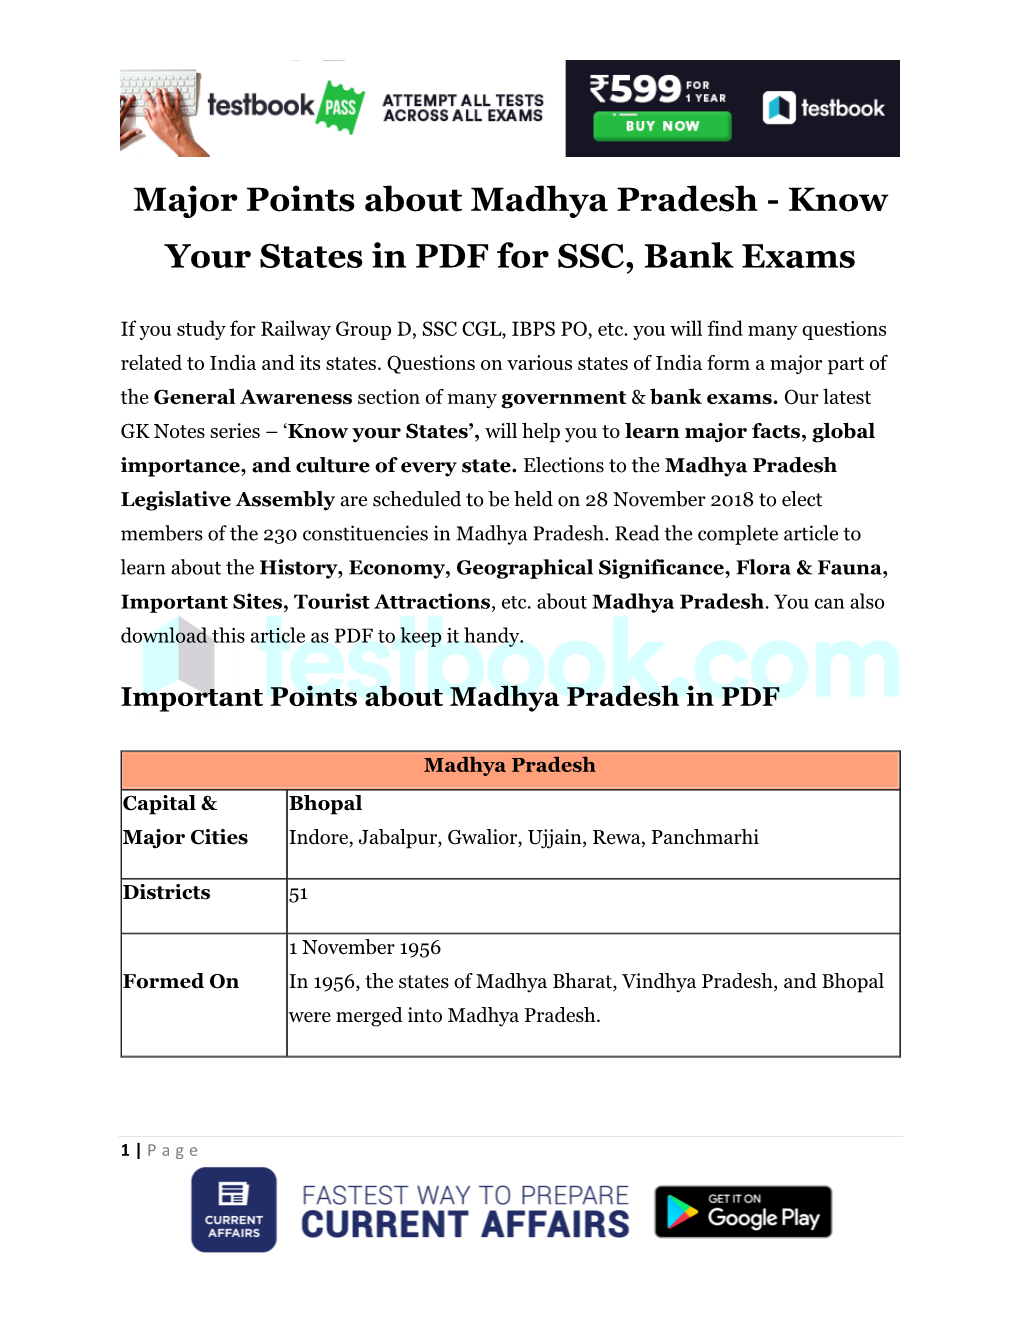 Major Points About Madhya Pradesh - Know Your States in PDF for SSC, Bank Exams